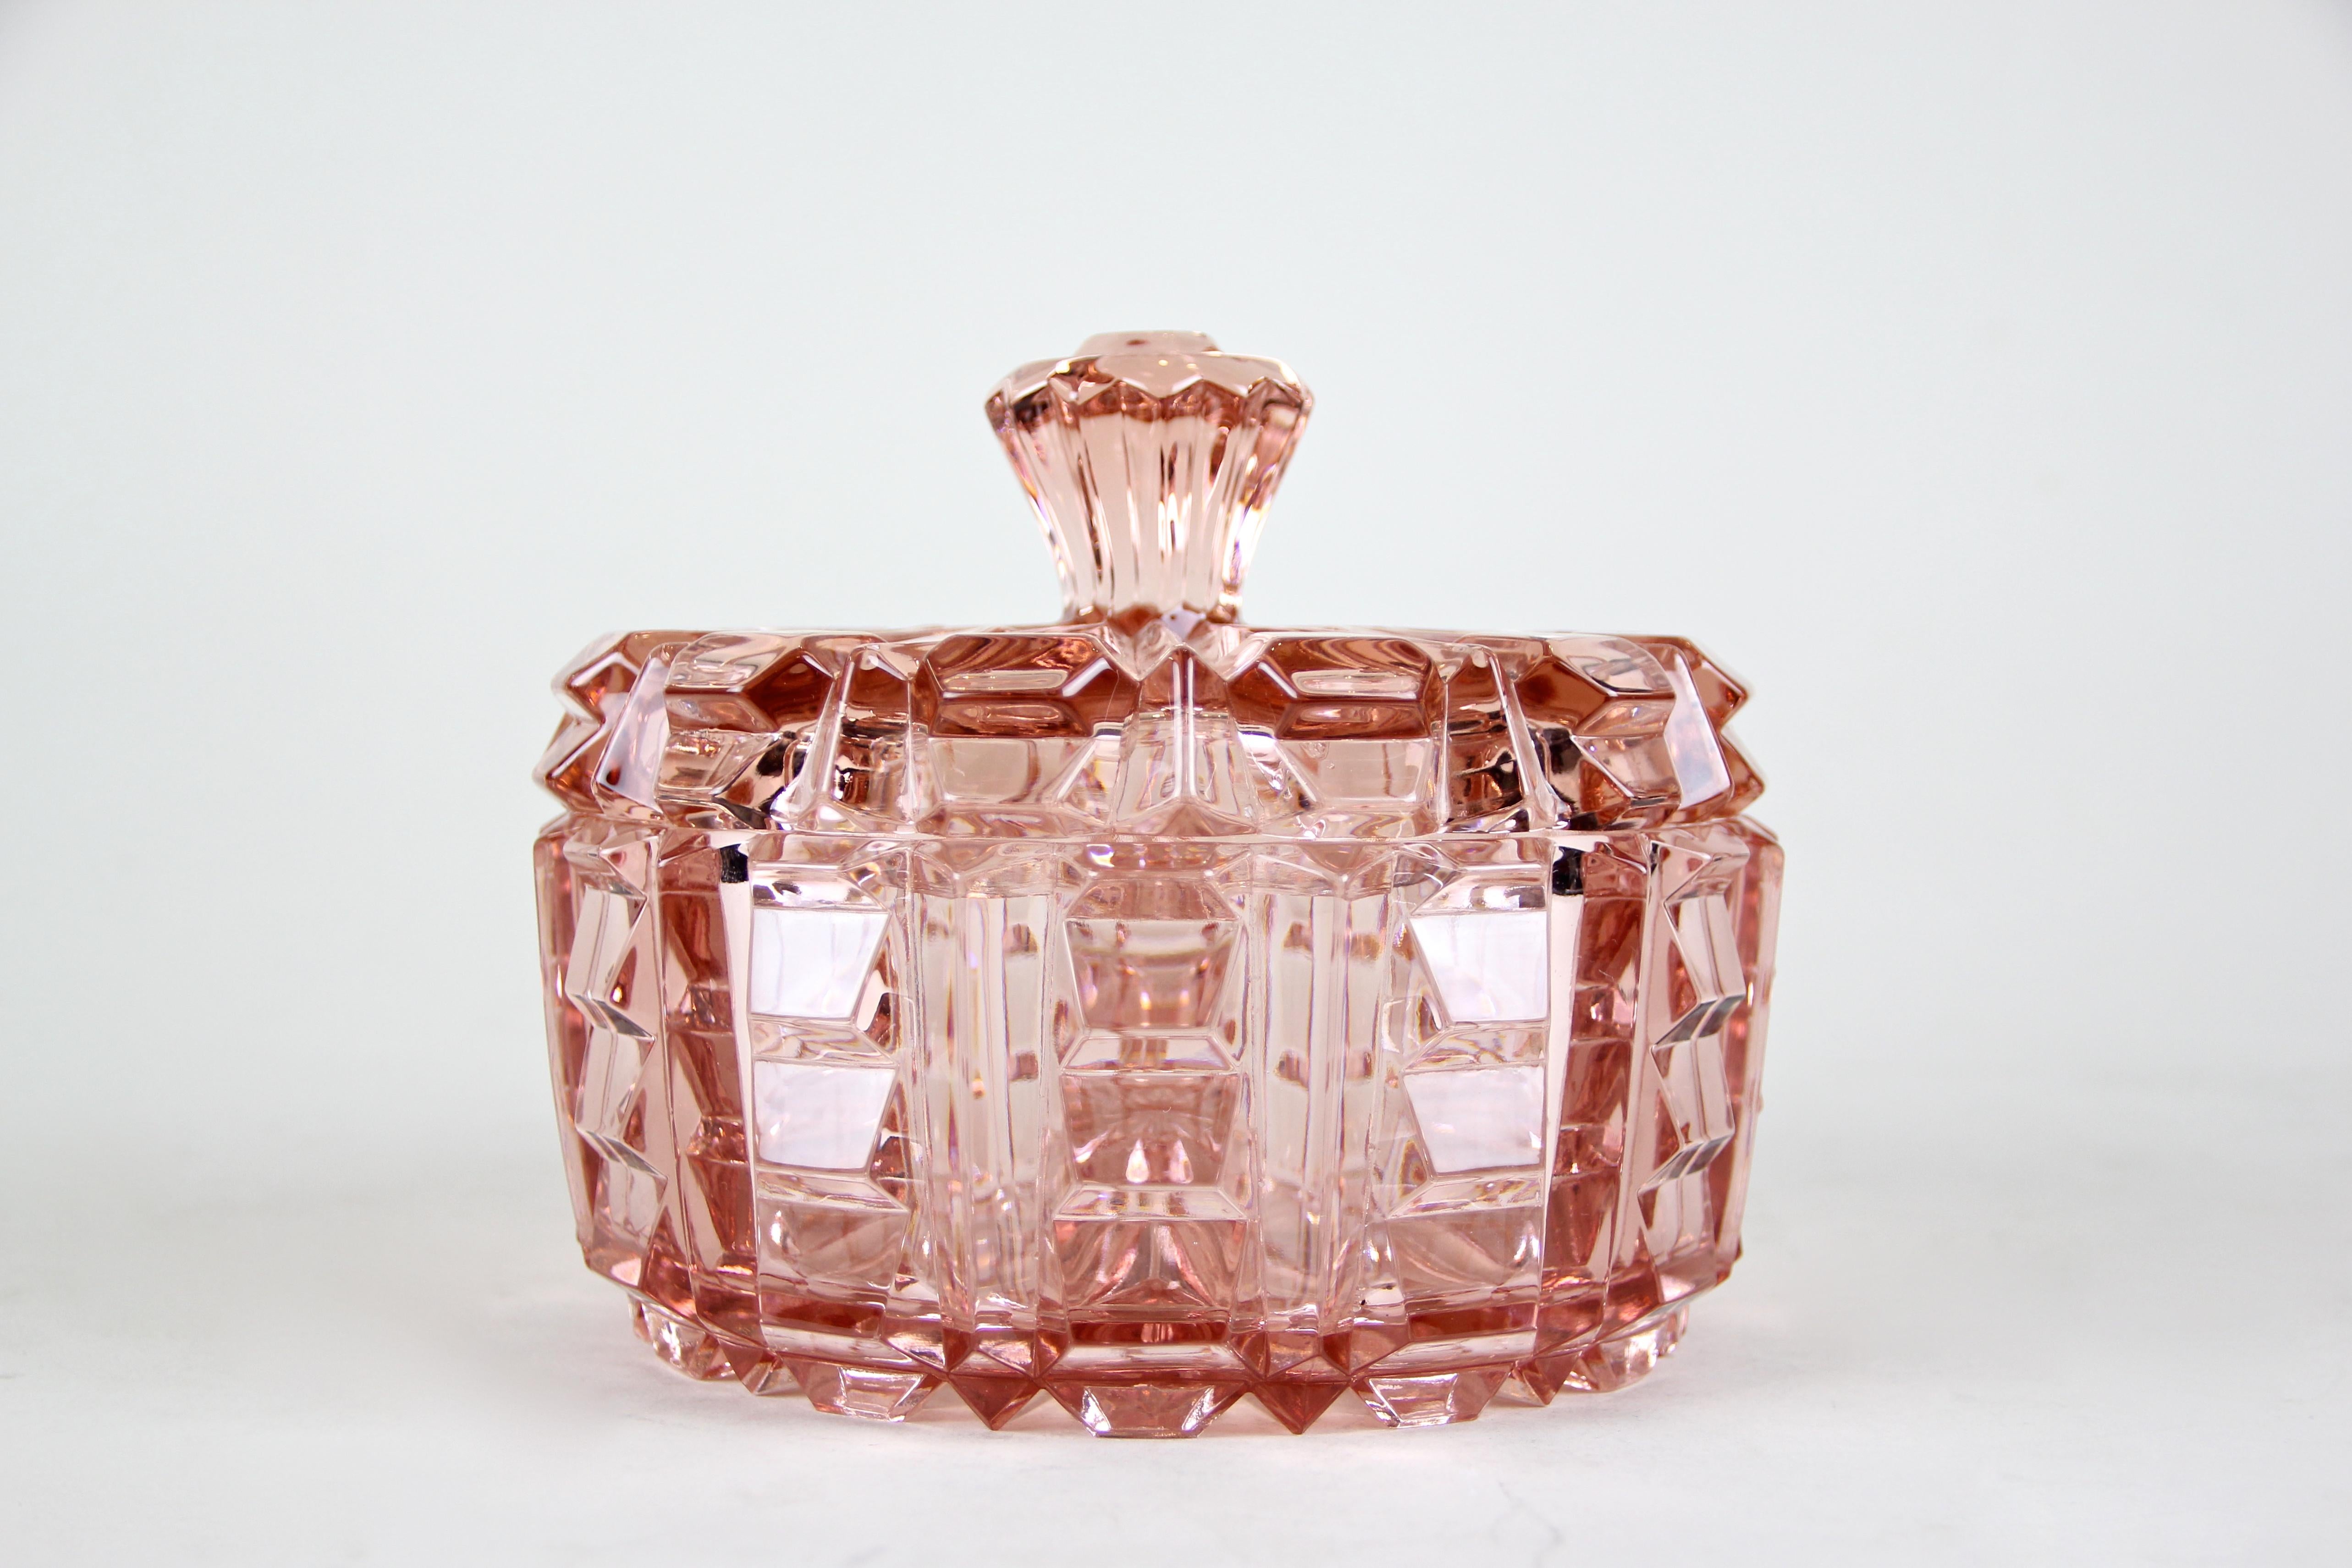 Very lovely Art Deco Glass Bowl with Lid from the period in Austria around 1930. The beautiful rose colored pressed glass impresses with an outstanding design. A great shaped glass lid completes the fantastic look of this artfully made glass bowl.